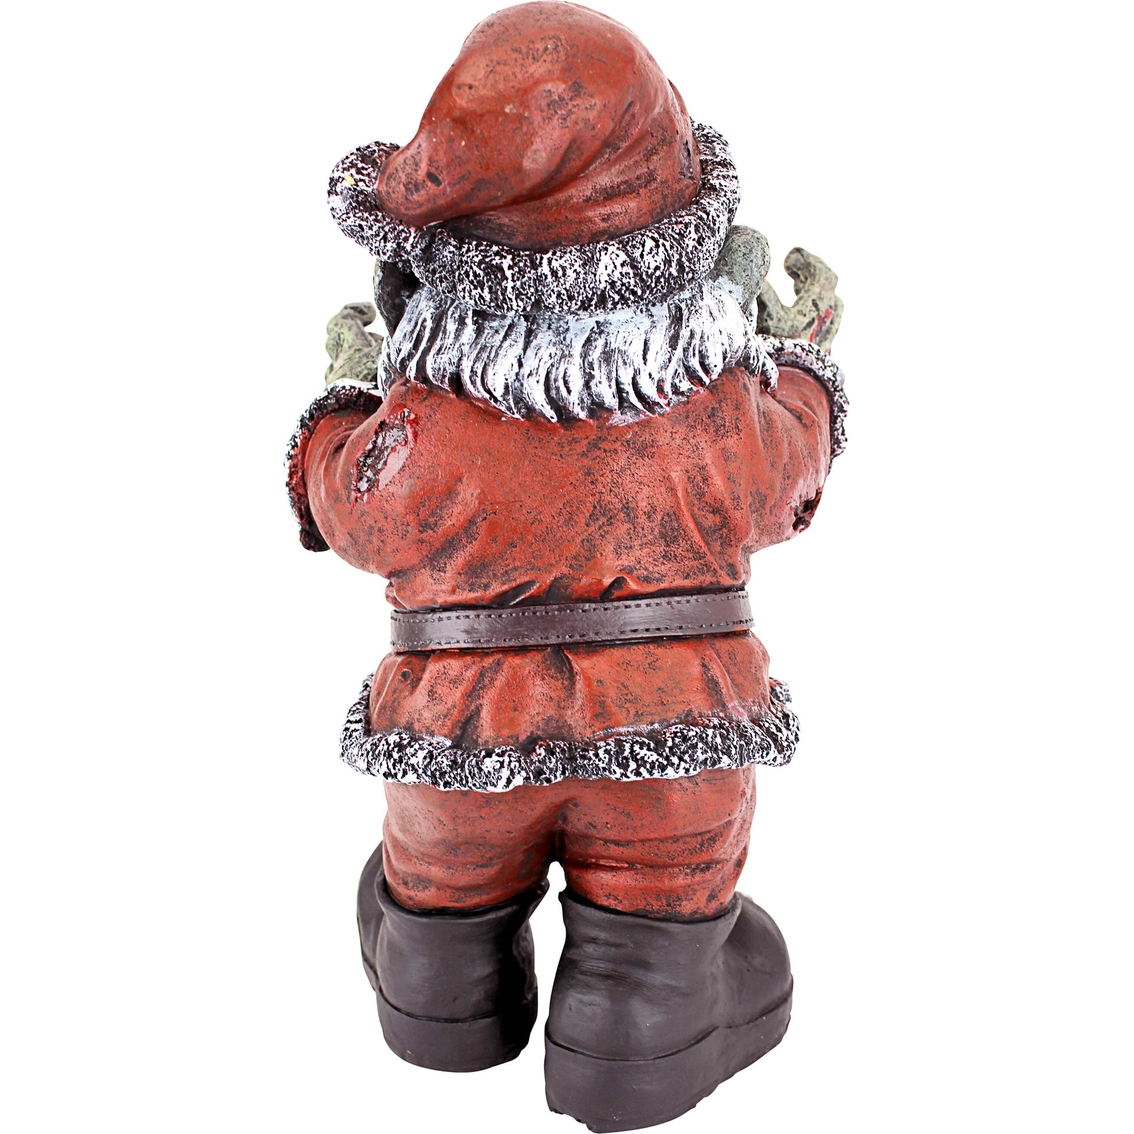 Design Toscano Zombie Claus Holiday Statue - Image 3 of 4